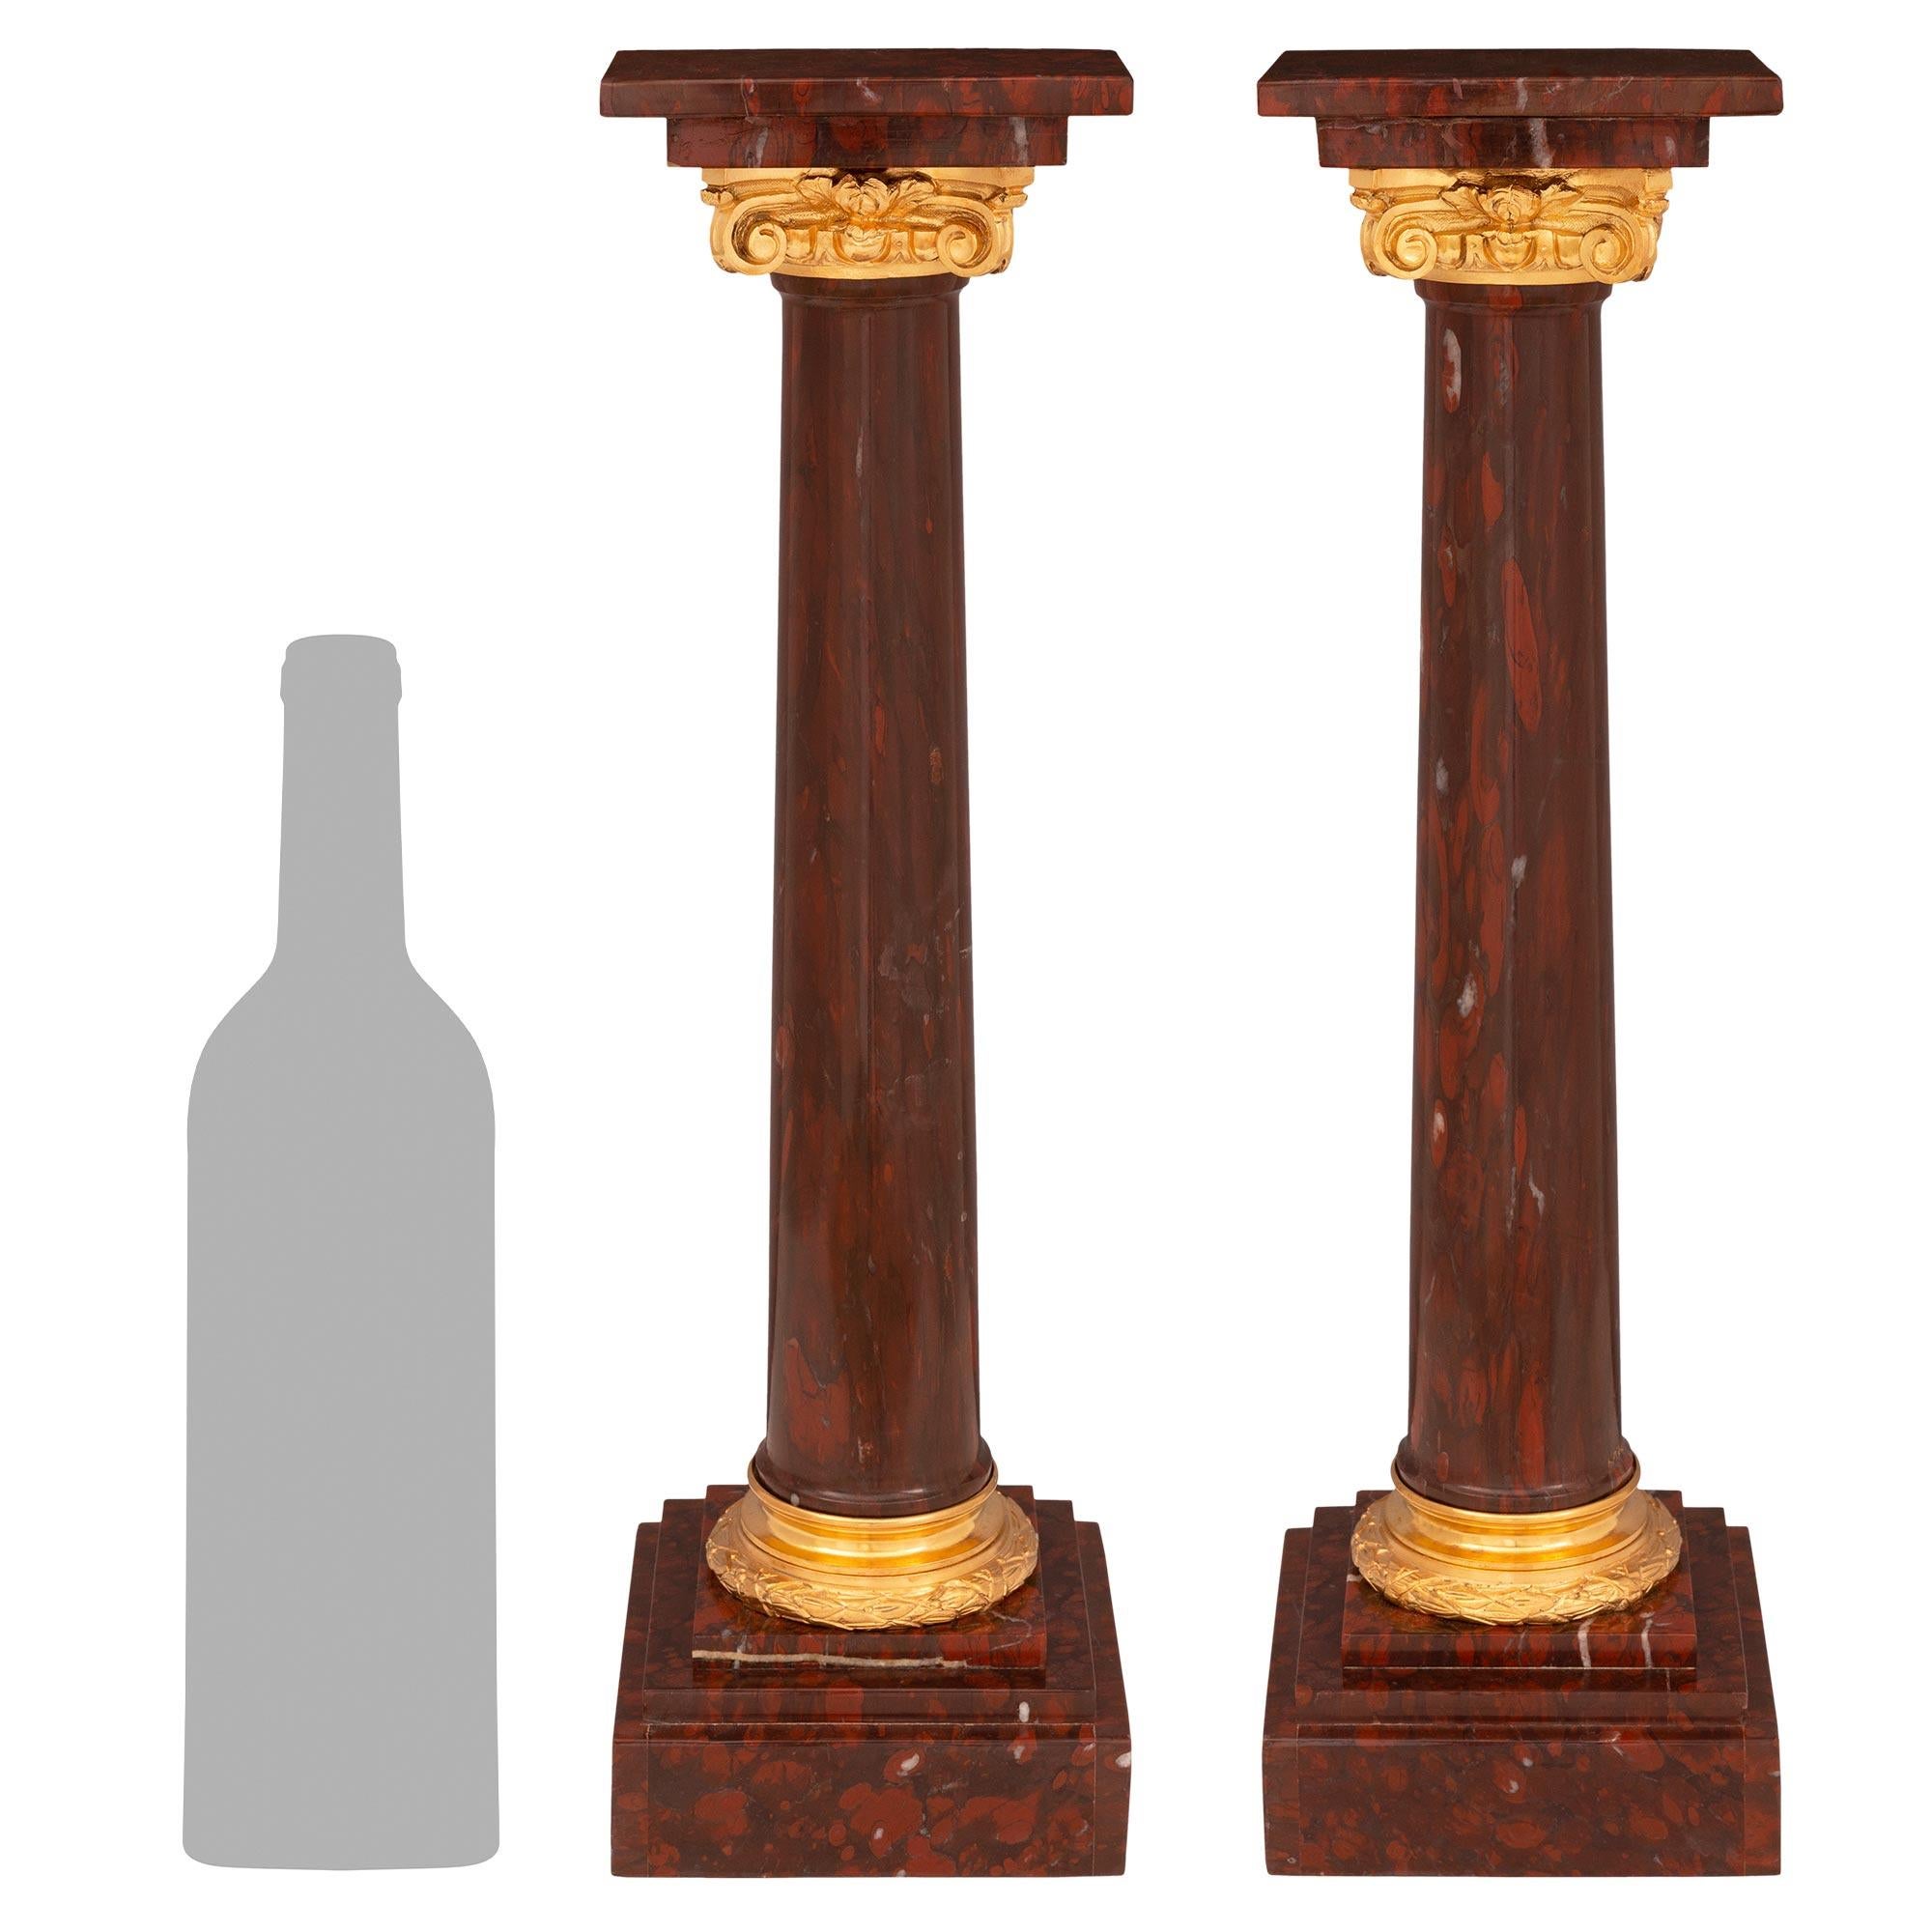 An elegant and most decorative pair of small scale French 19th century Louis XVI st. Rouge Griotte marble and ormolu columns. Each column is raised by a fine square base with stepped designs below circular mottled supports with richly chased tied